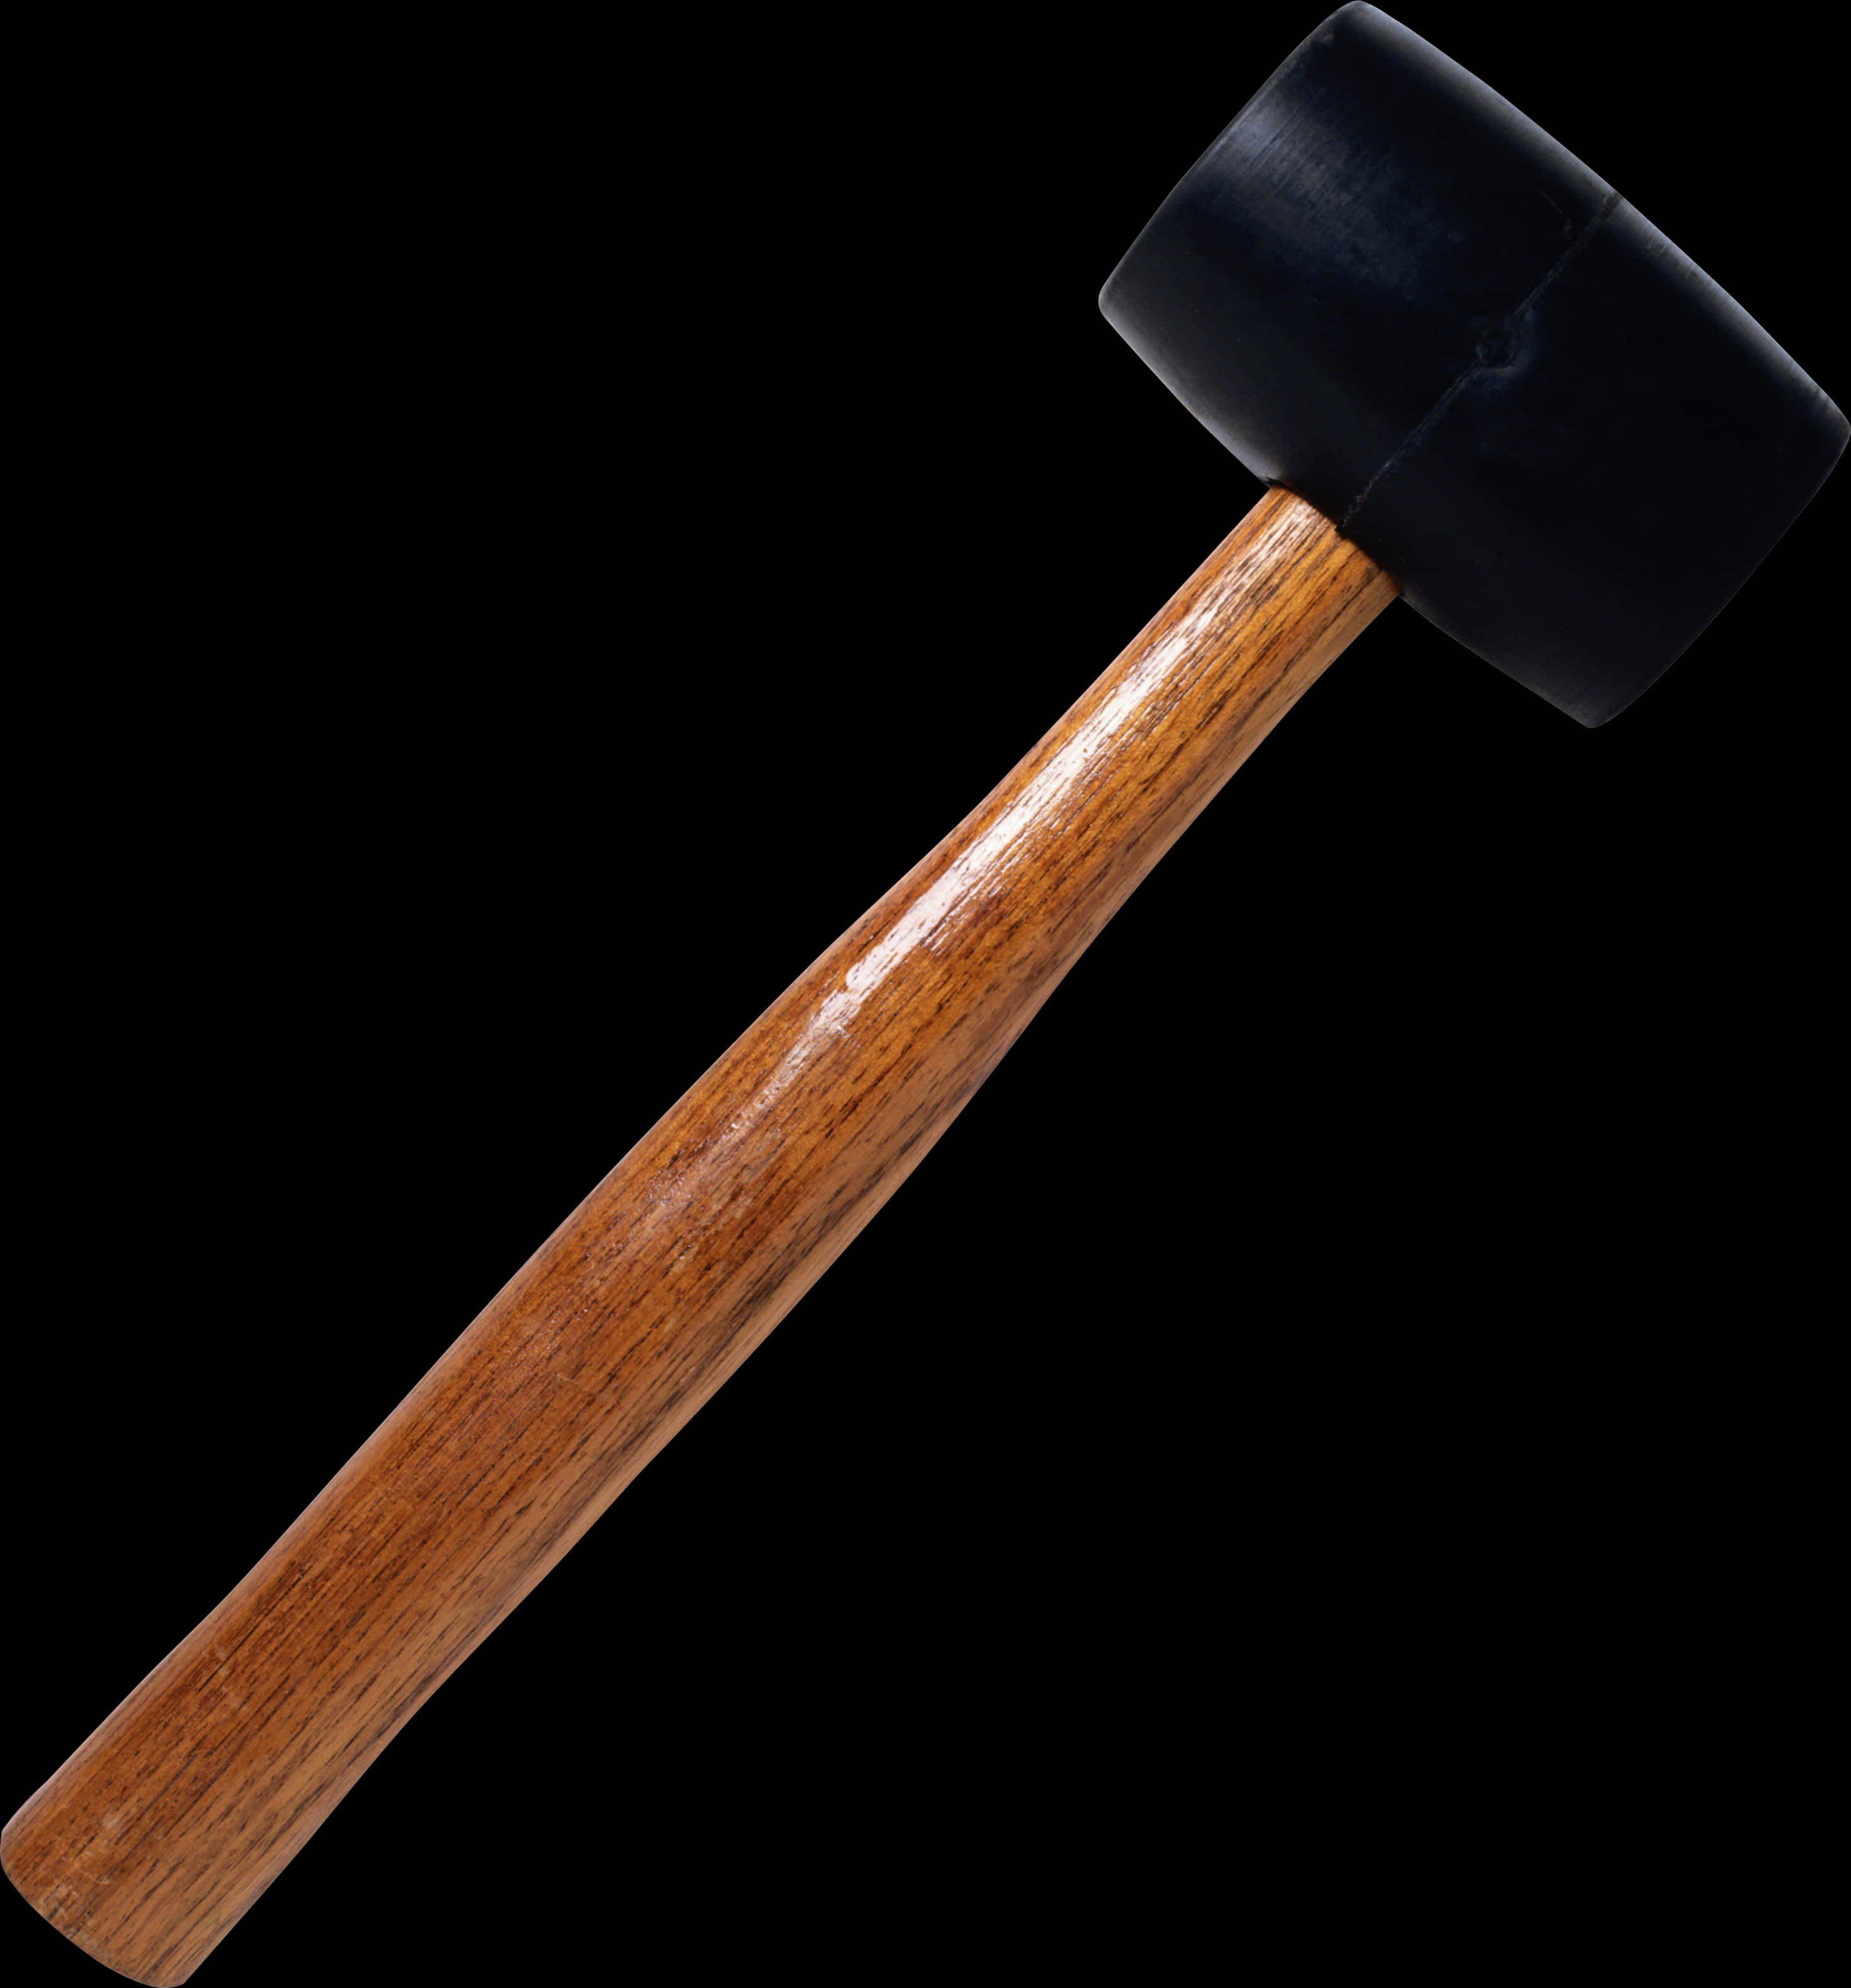 A Black Rubber Mallet With A Wooden Handle